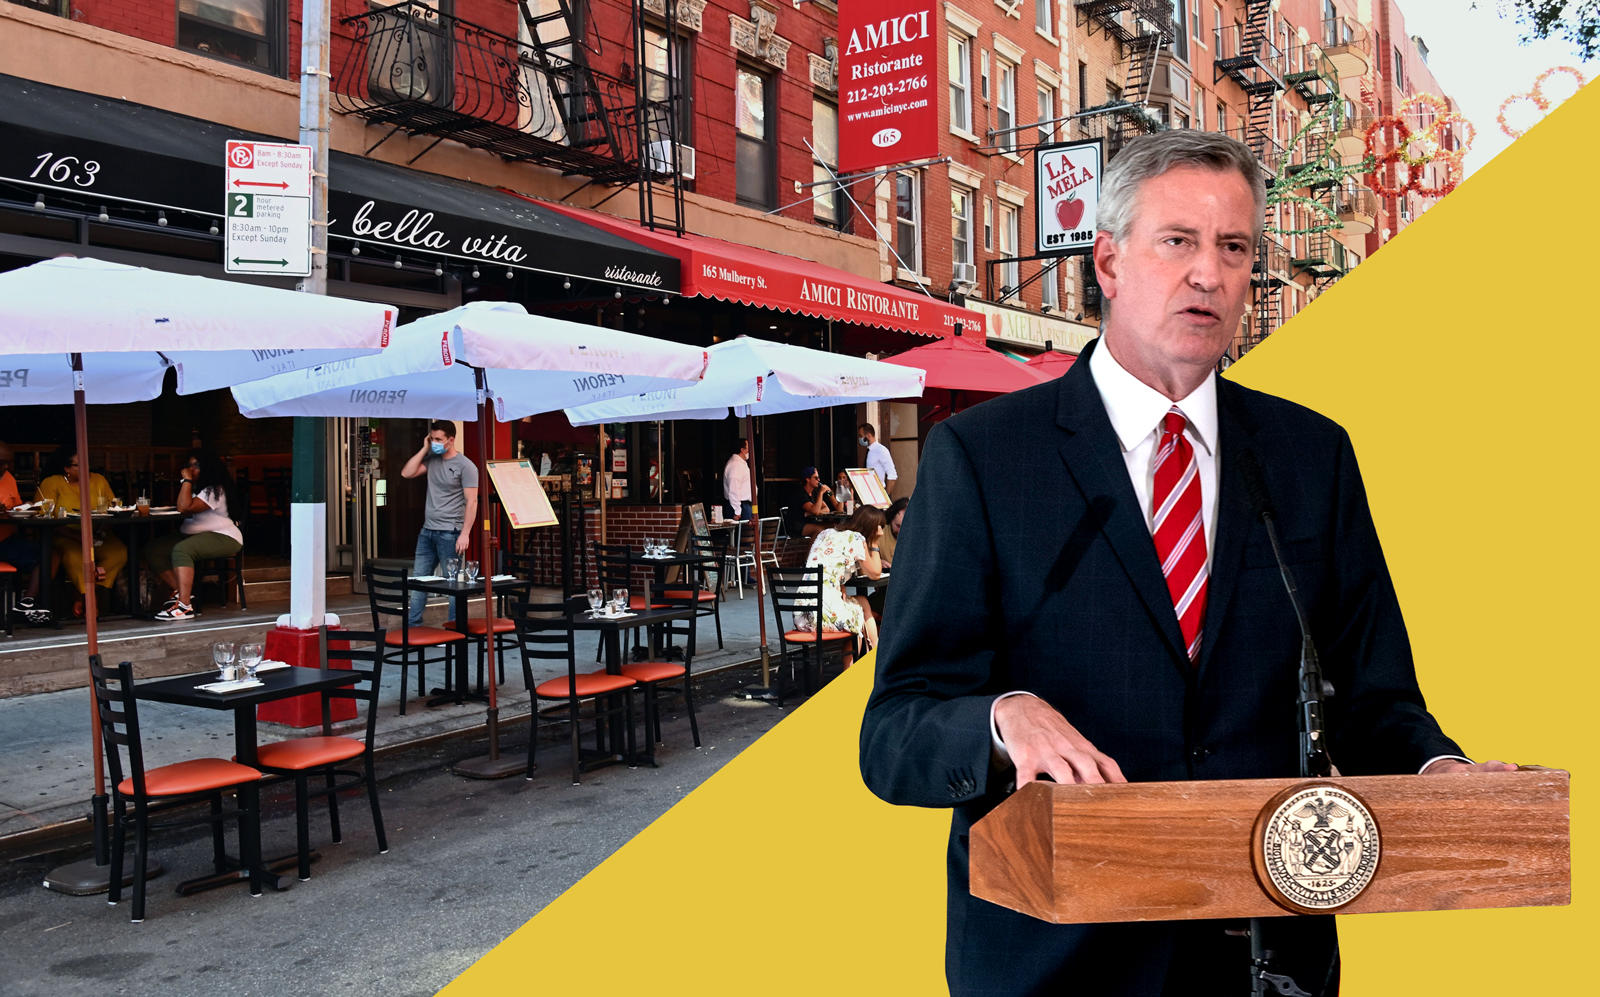 Mayor Bill de Blasio announces “a new New York City tradition” as outdoor dining is set to return next year (de Blasio by Lev Radin/Pacific Press/LightRocket via Getty Images; background by ANGELA WEISS/AFP via Getty Images)